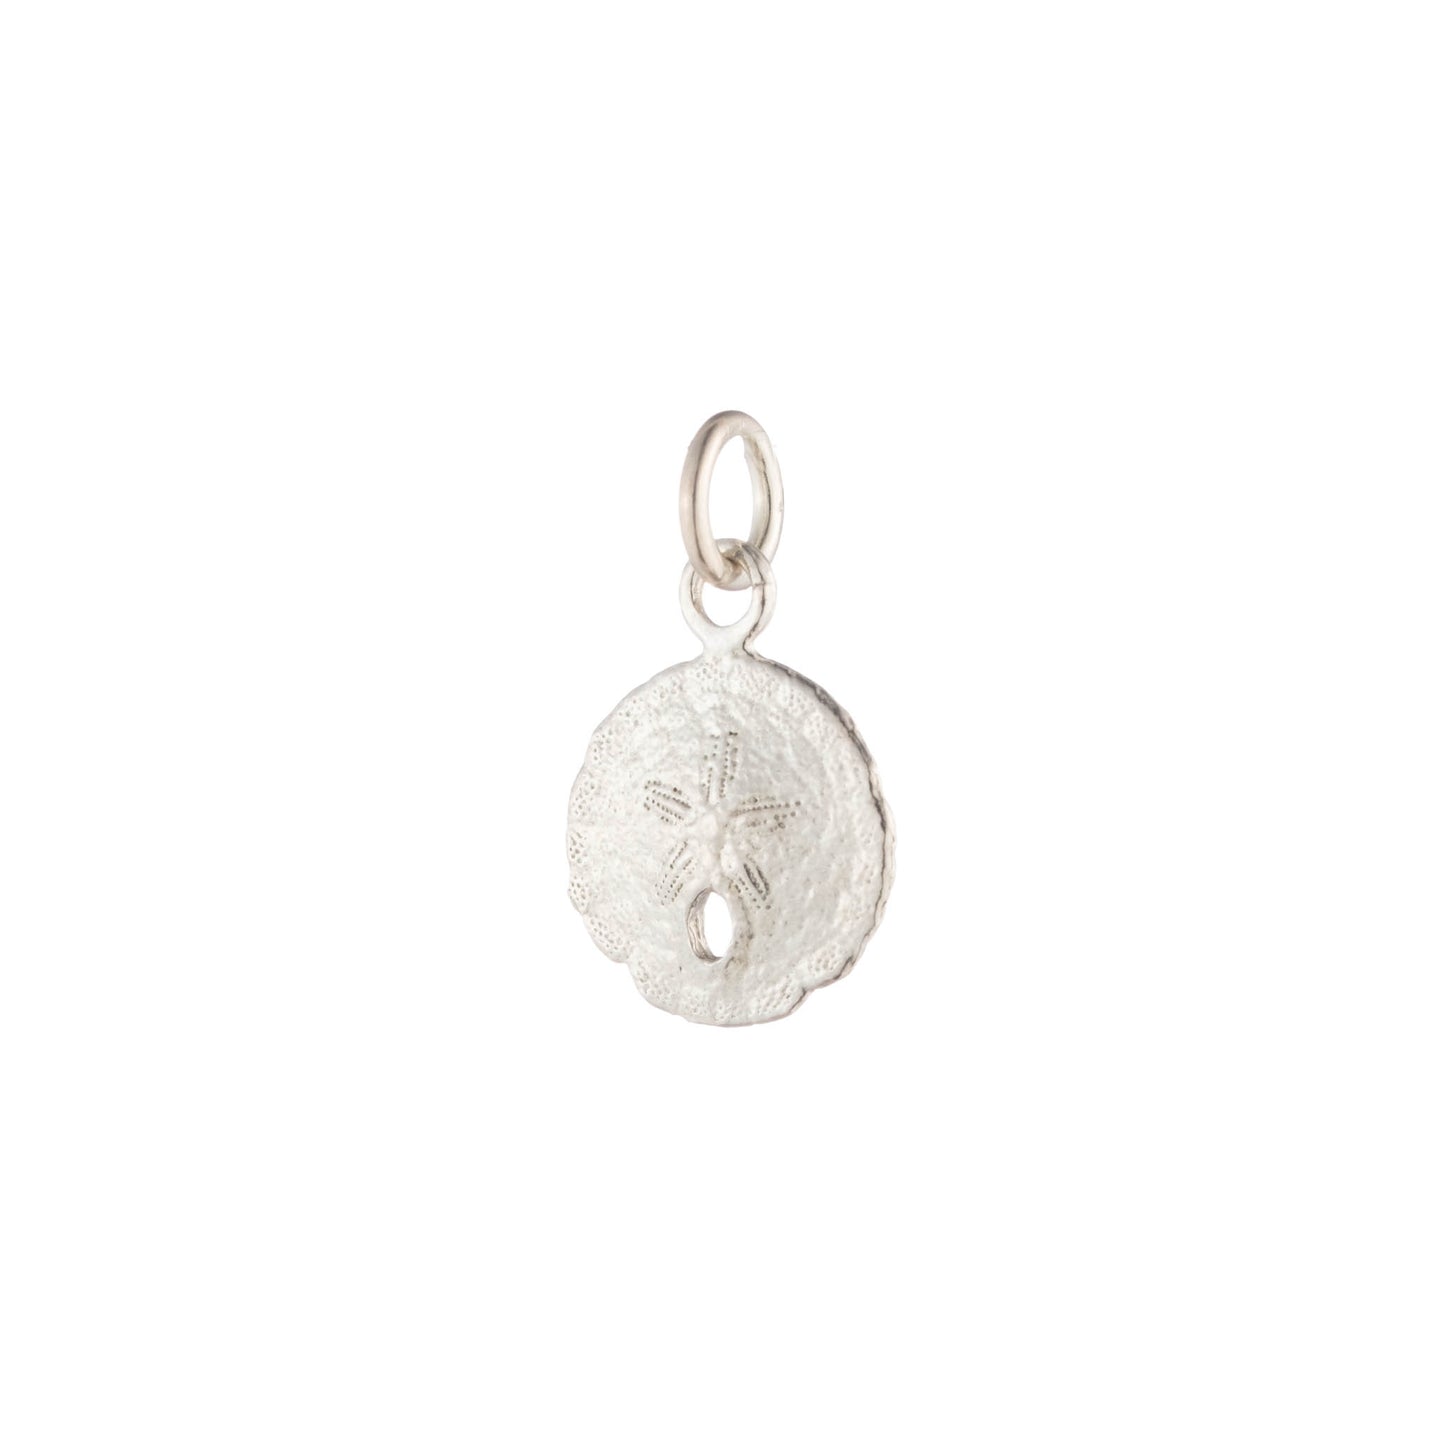 Sand Dollar Charm in Sterling